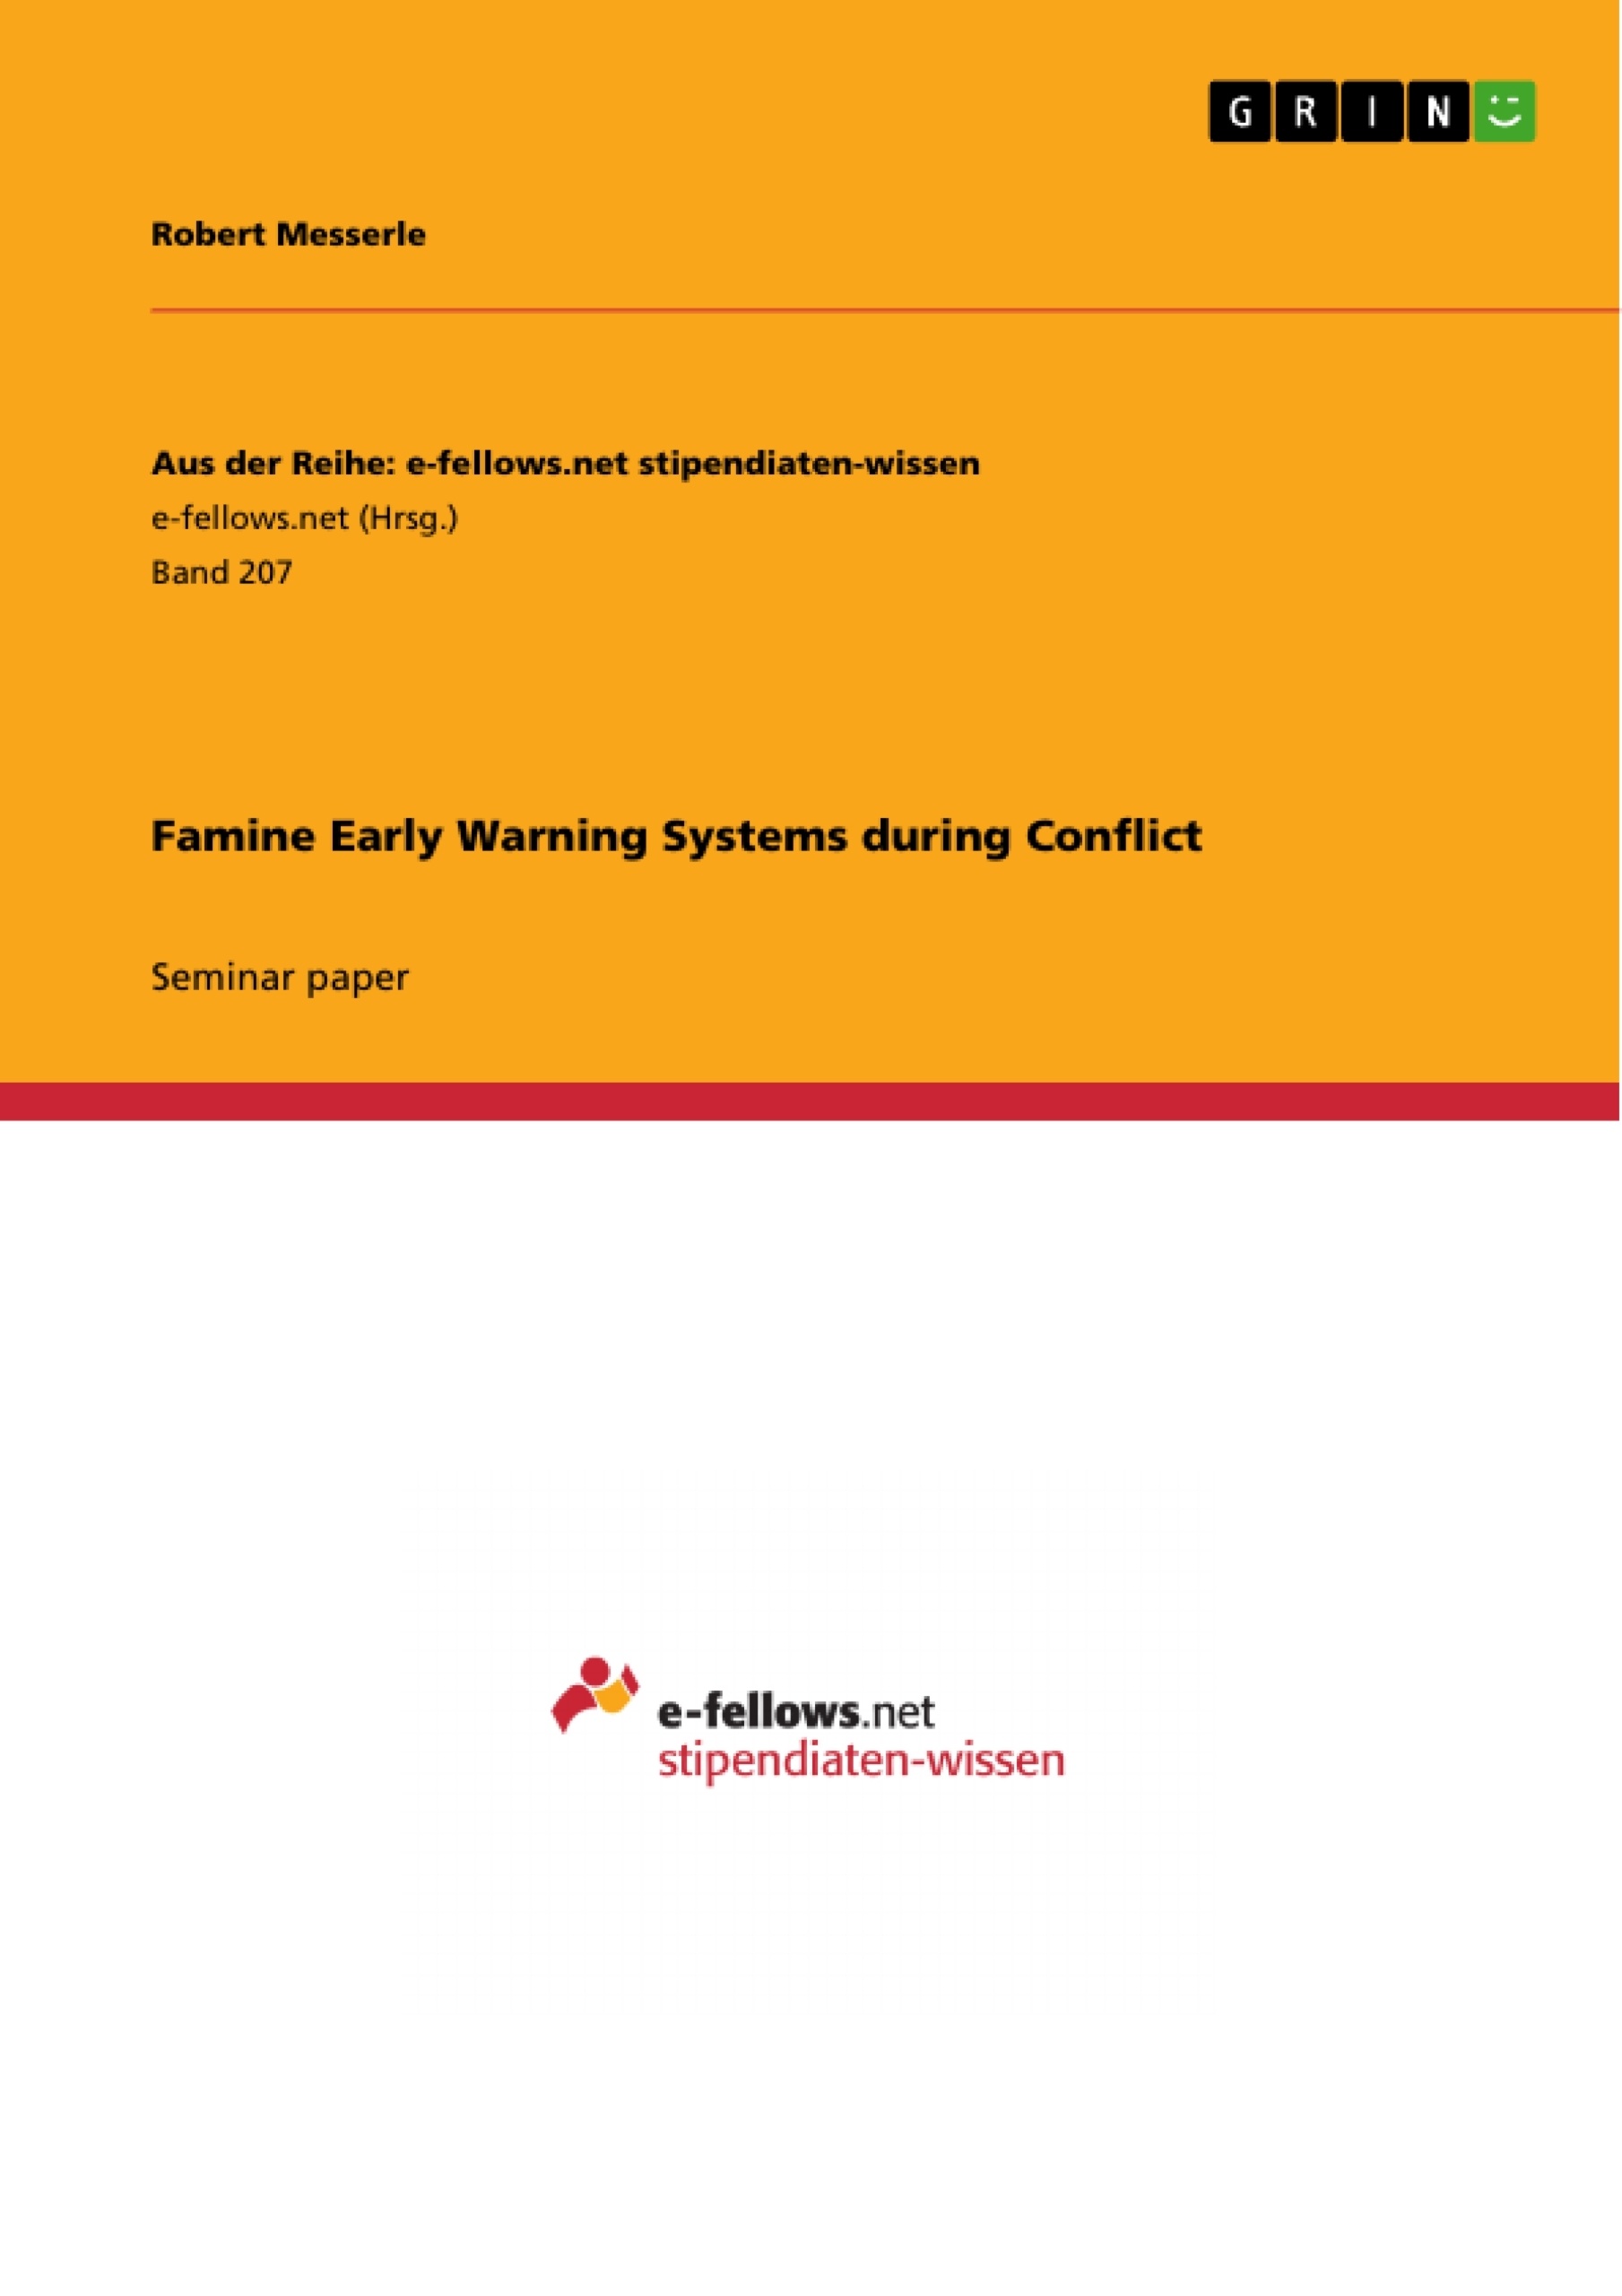 Title: Famine Early Warning Systems during Conflict